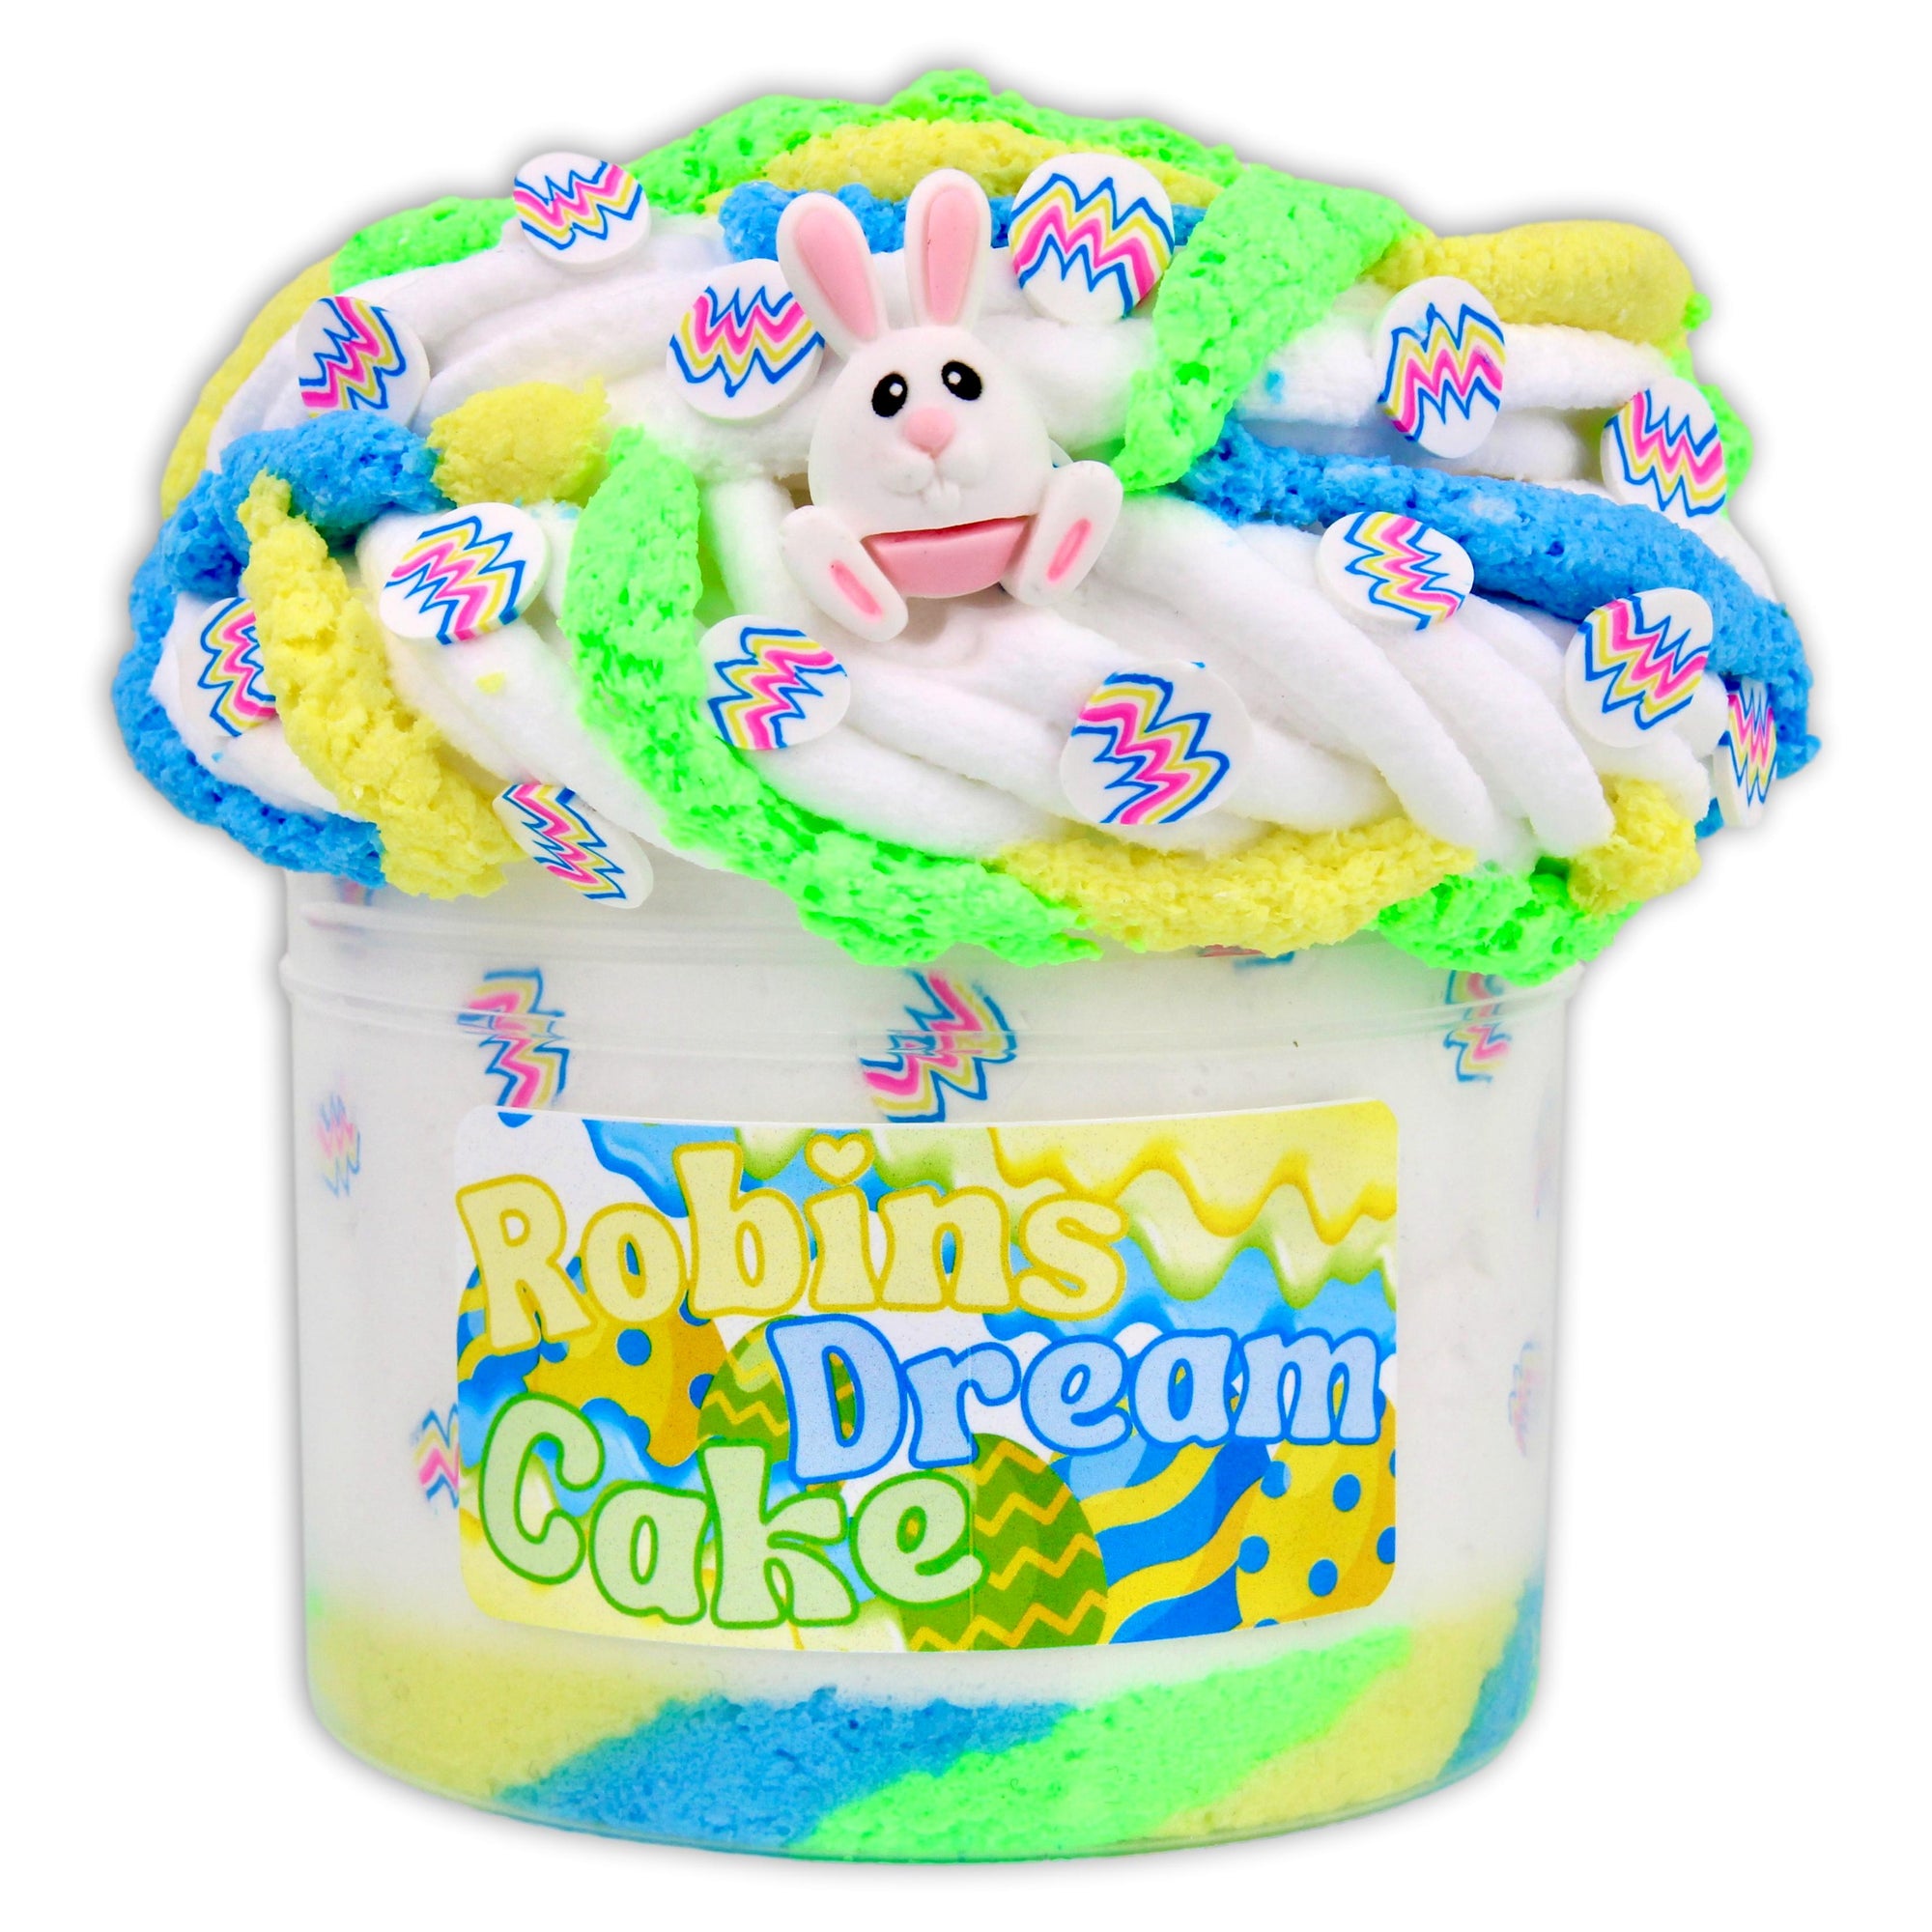 Birthday Cake Ice Cream - Butter Textured Slime - Handmade in USA - Dope  Slimes - Scented - White